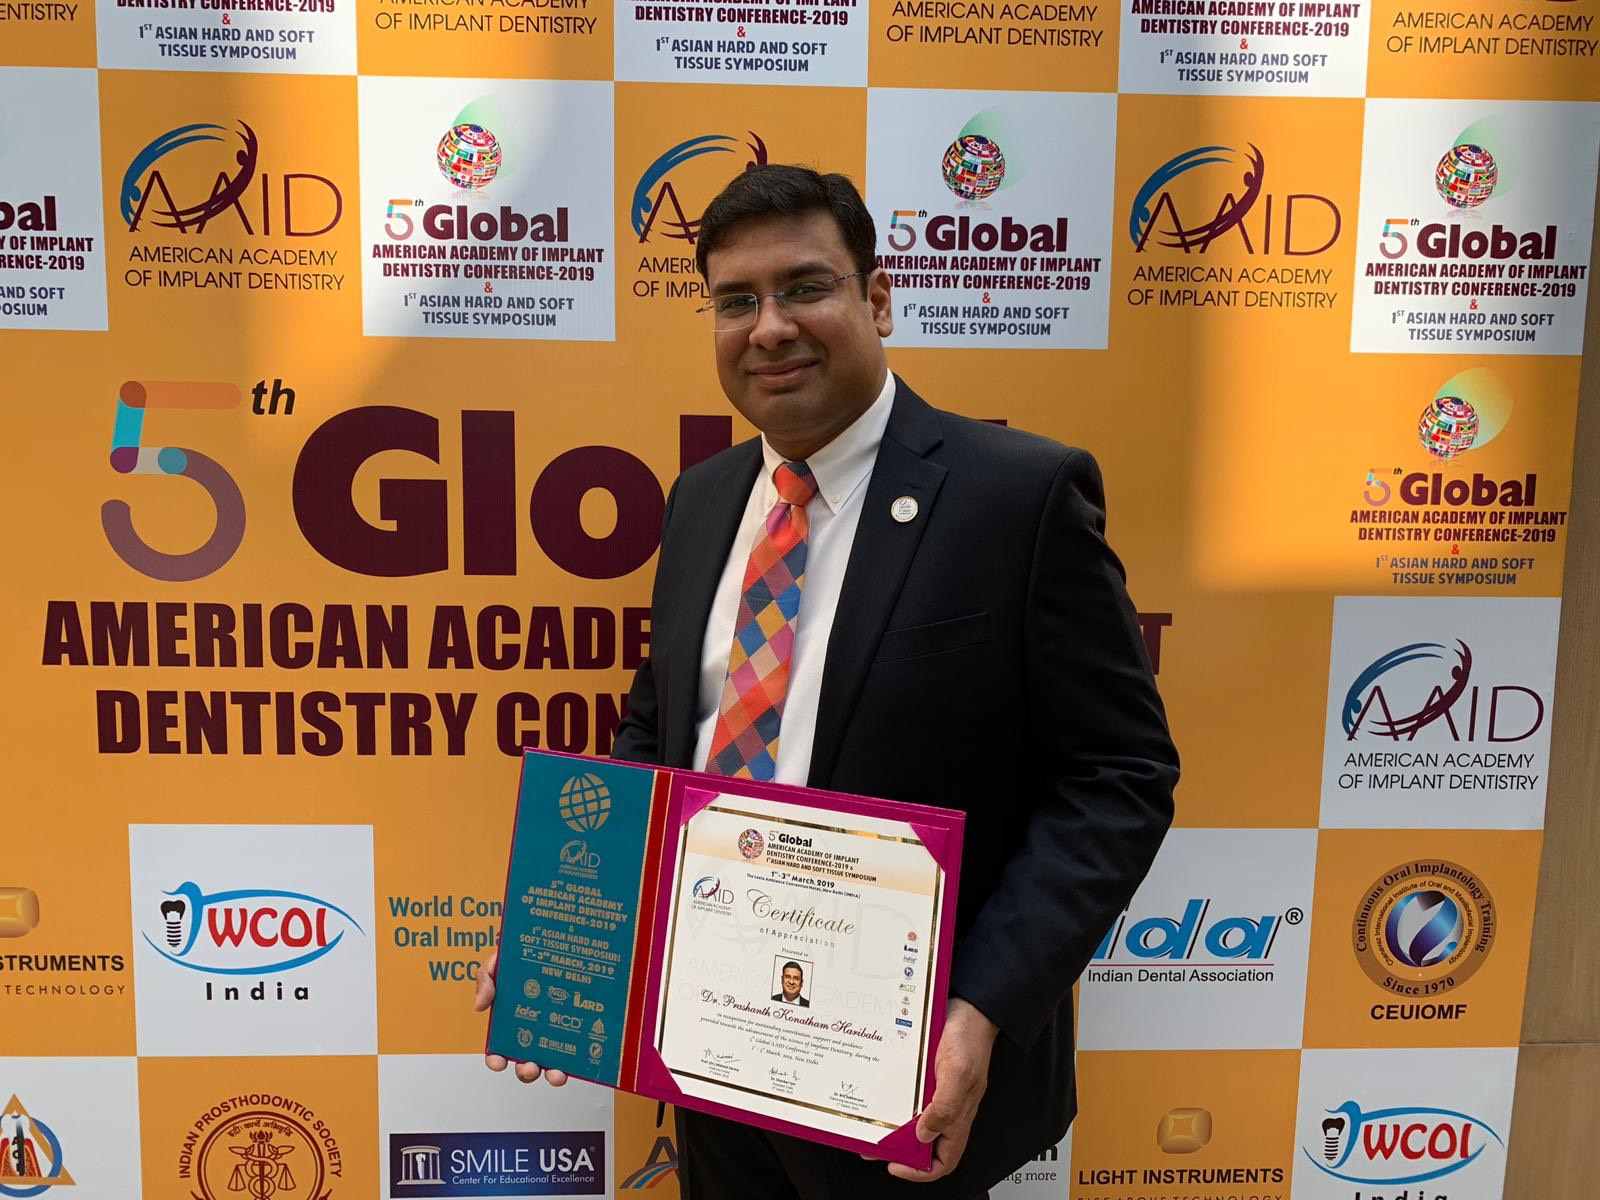 Dr. Haribabu standing with certification award